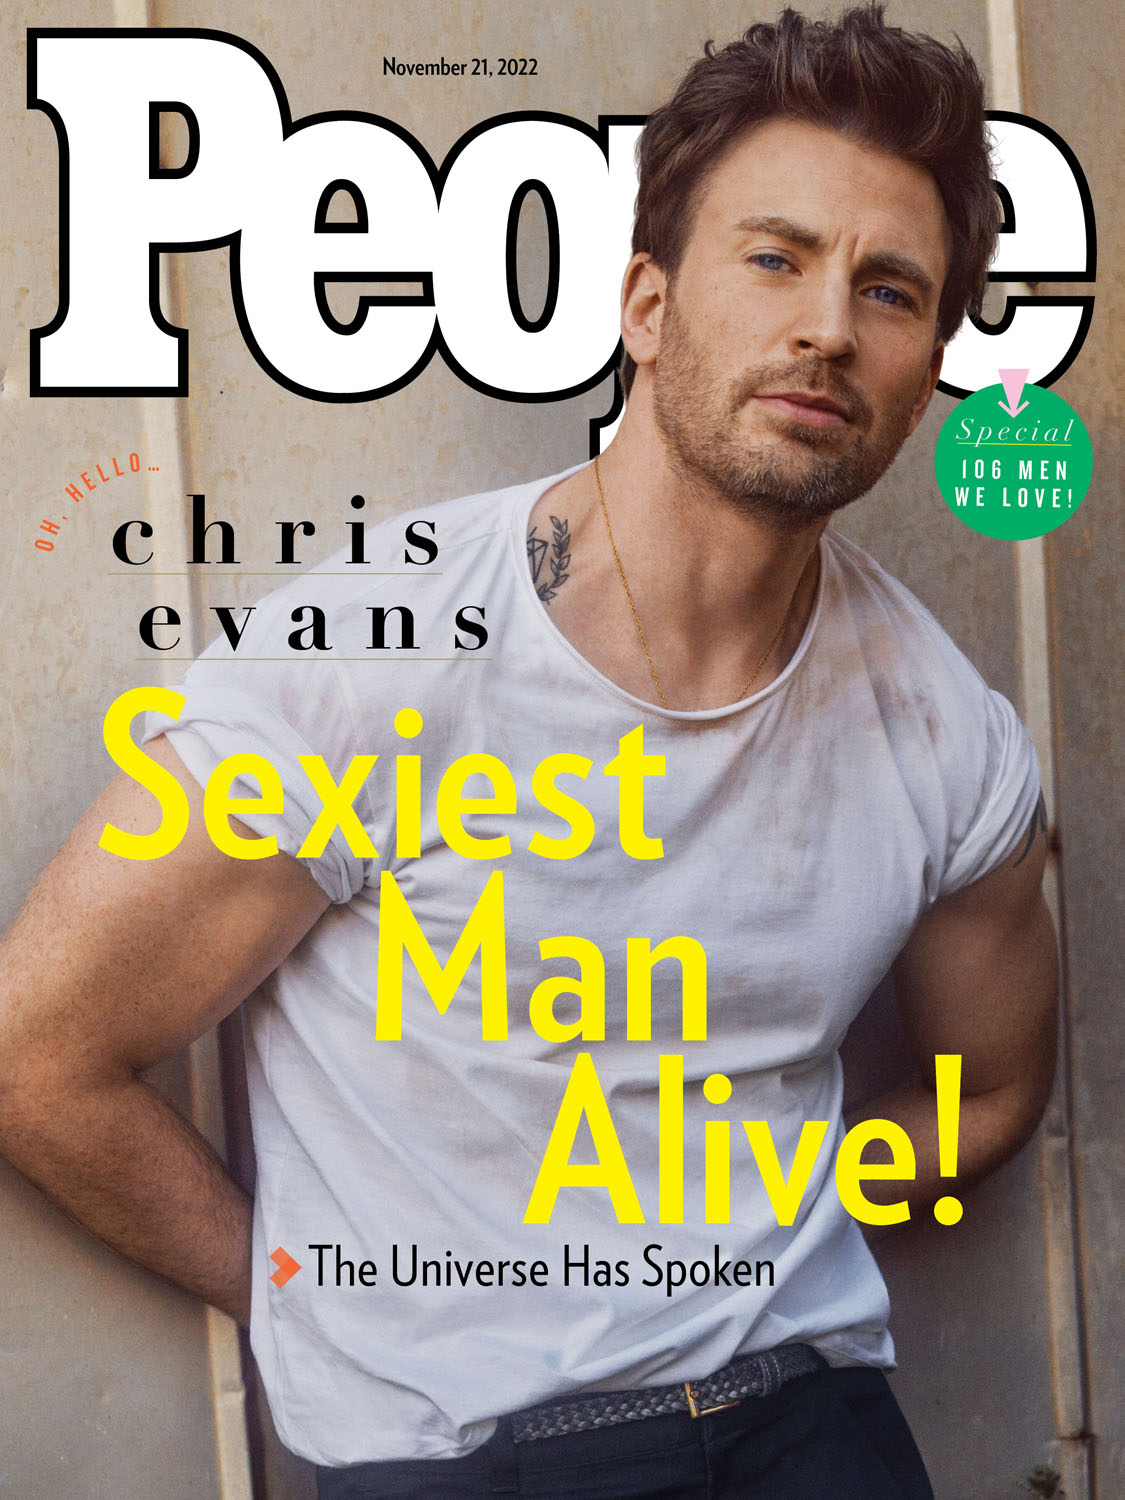 Chris Is Sexiest Man Alive - Fug Yourself